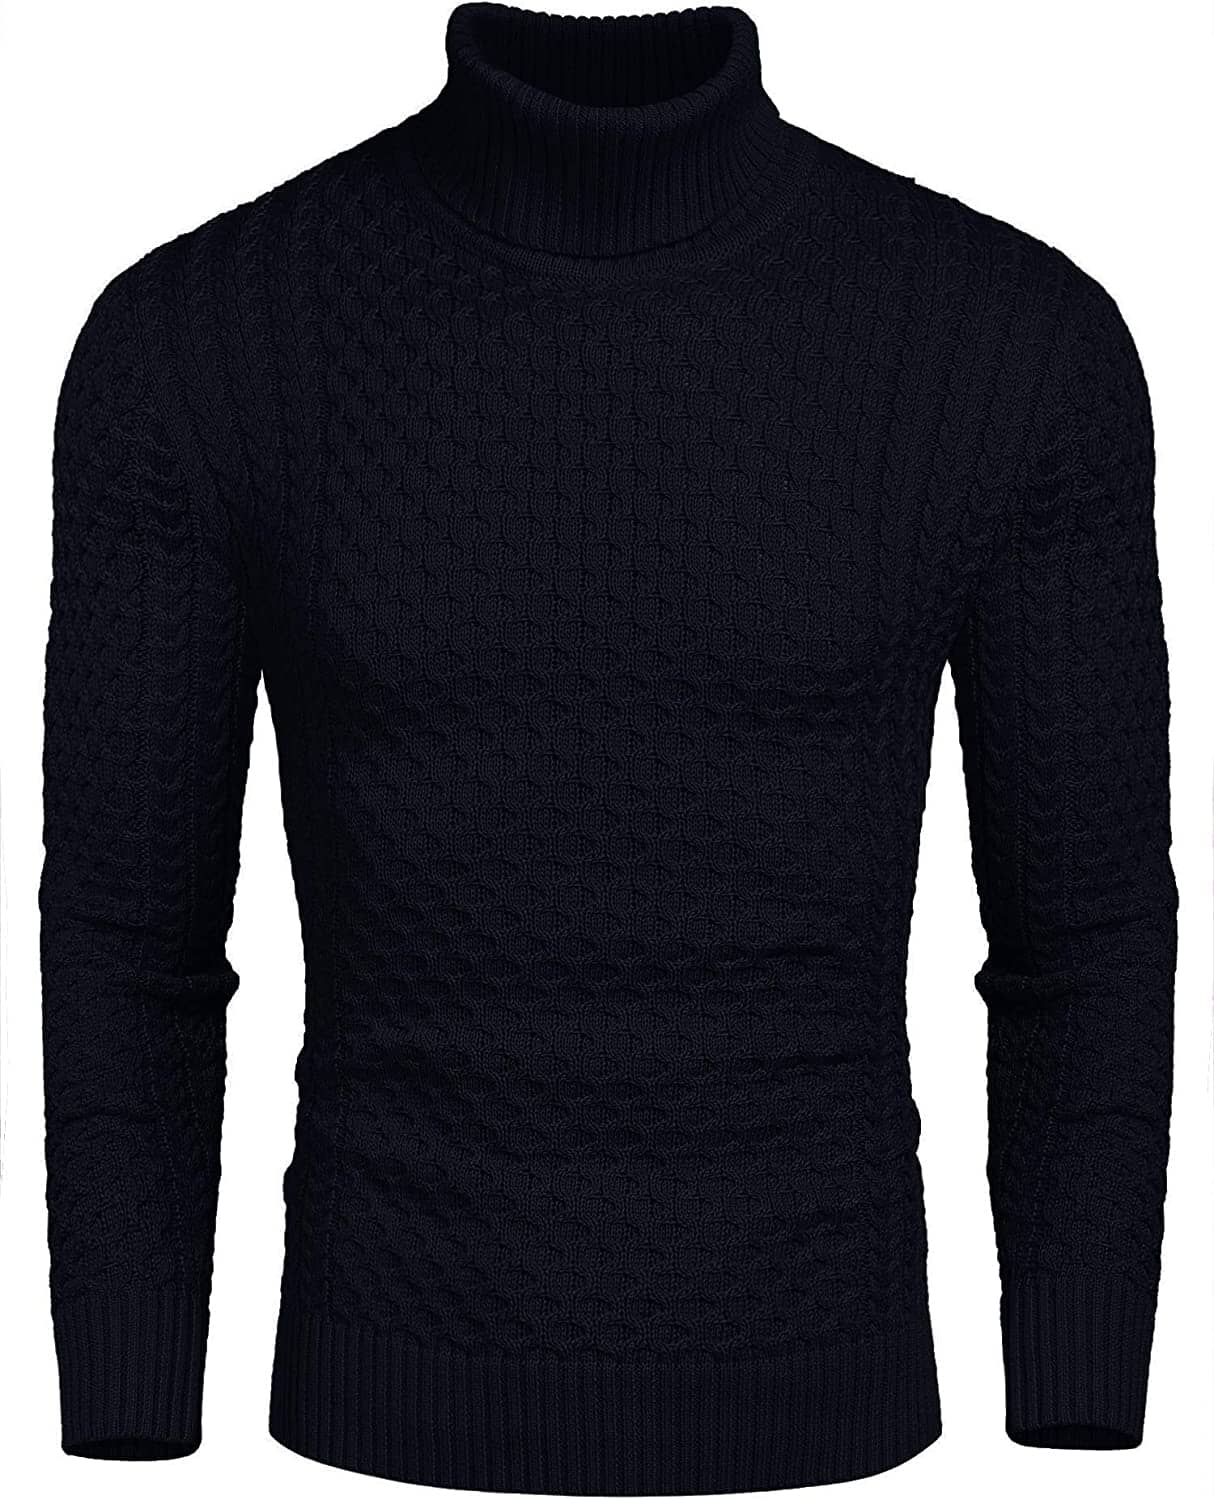 Slim Fit Turtleneck Twisted Sweater (US Only) Sweaters Coofandy's Nave Blue S 